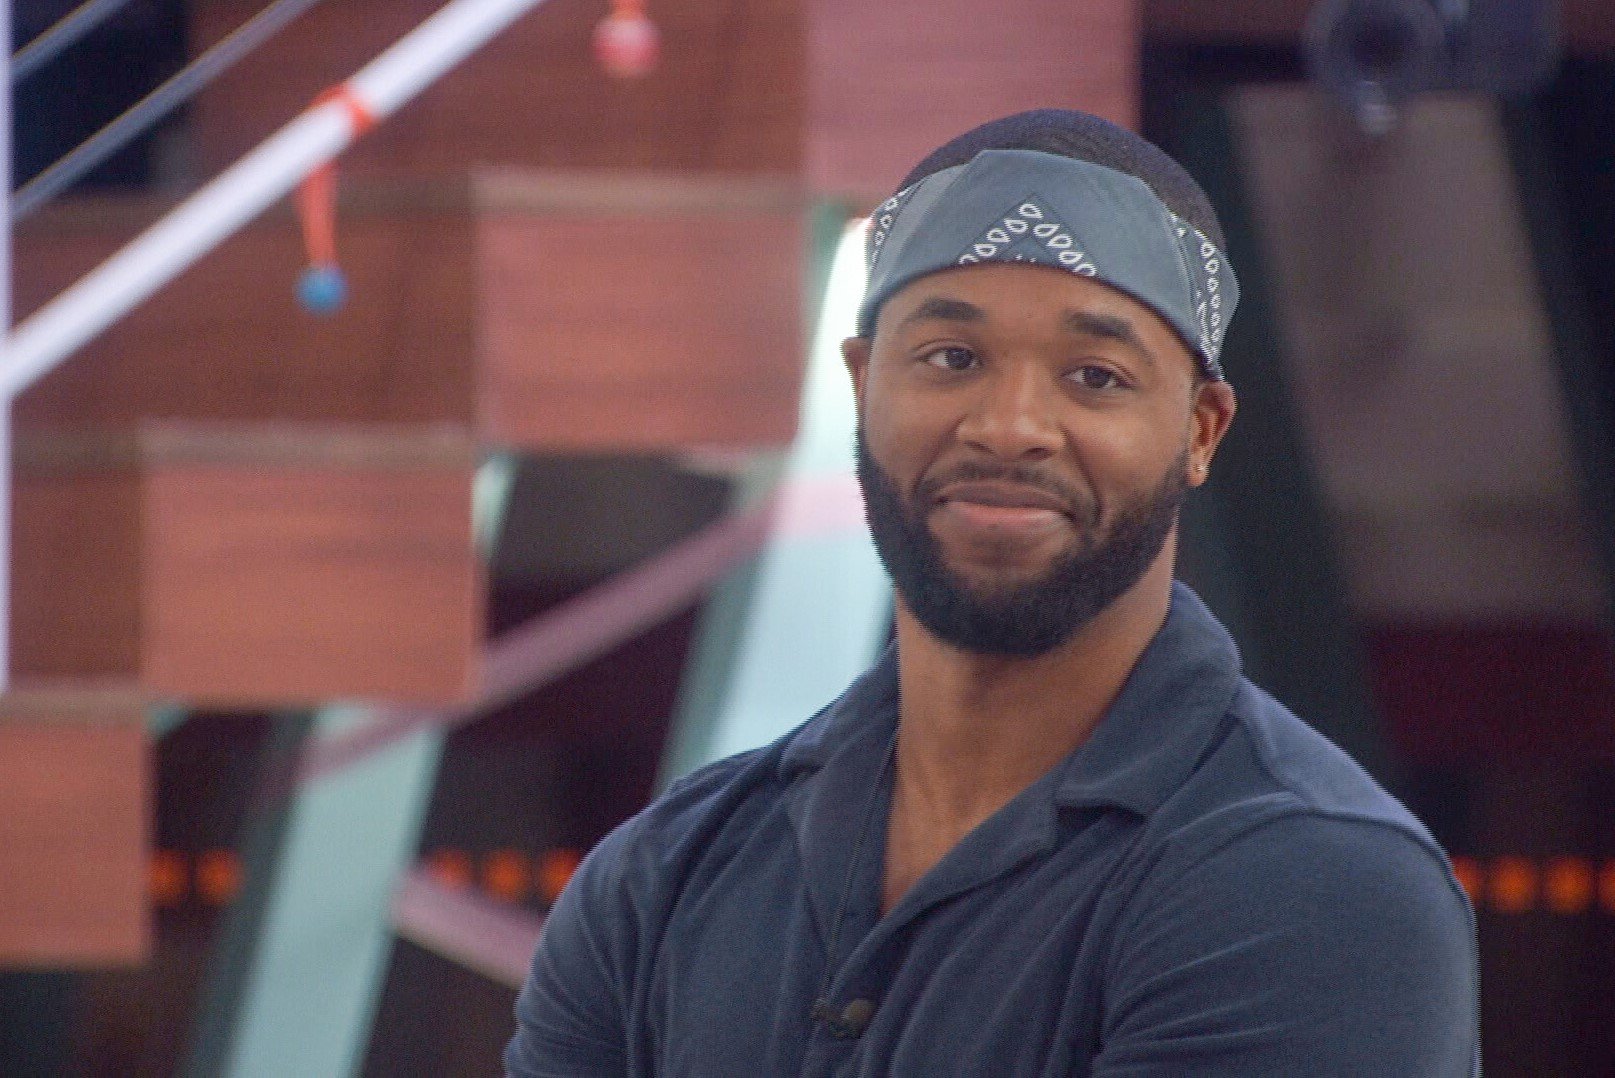 Monte Taylor, who cast the sole vote to evict in 'Big Brother 24' Episode 33, wears a dark blue polo shirt and dark gray bandana.